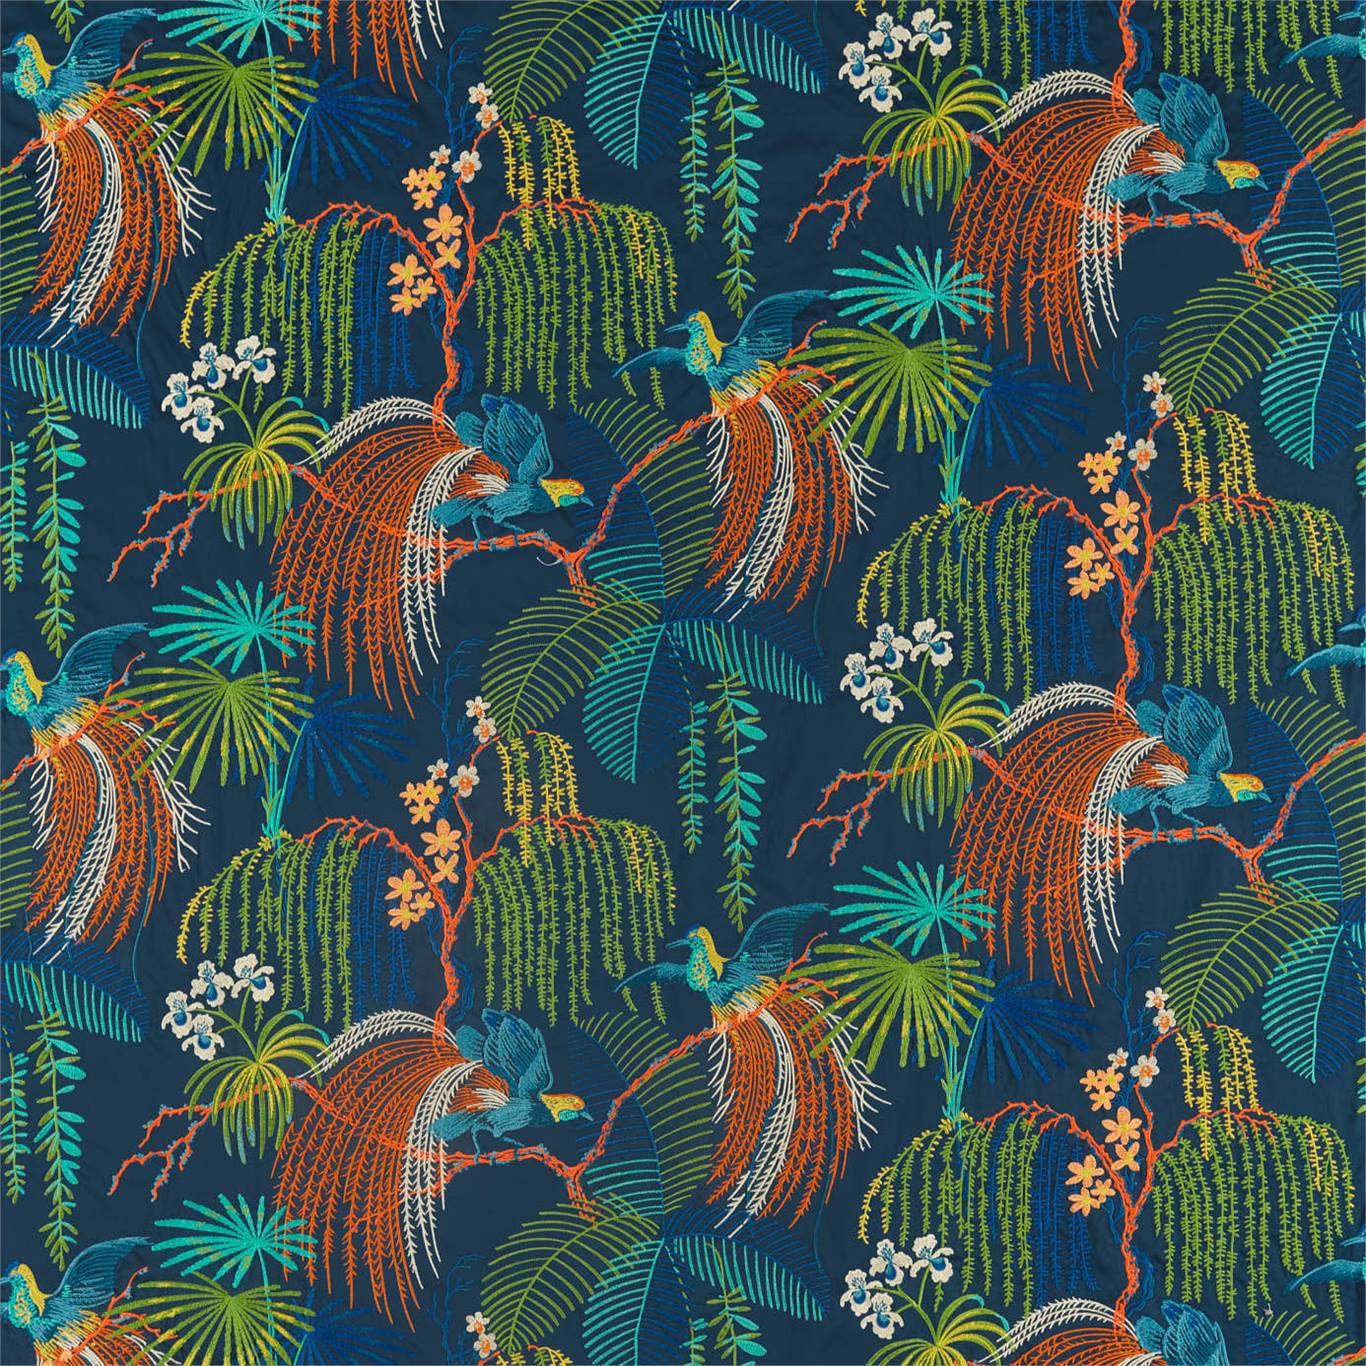 Rain Forest Embroidery Embroidery Tropical Night Fabric by SAN